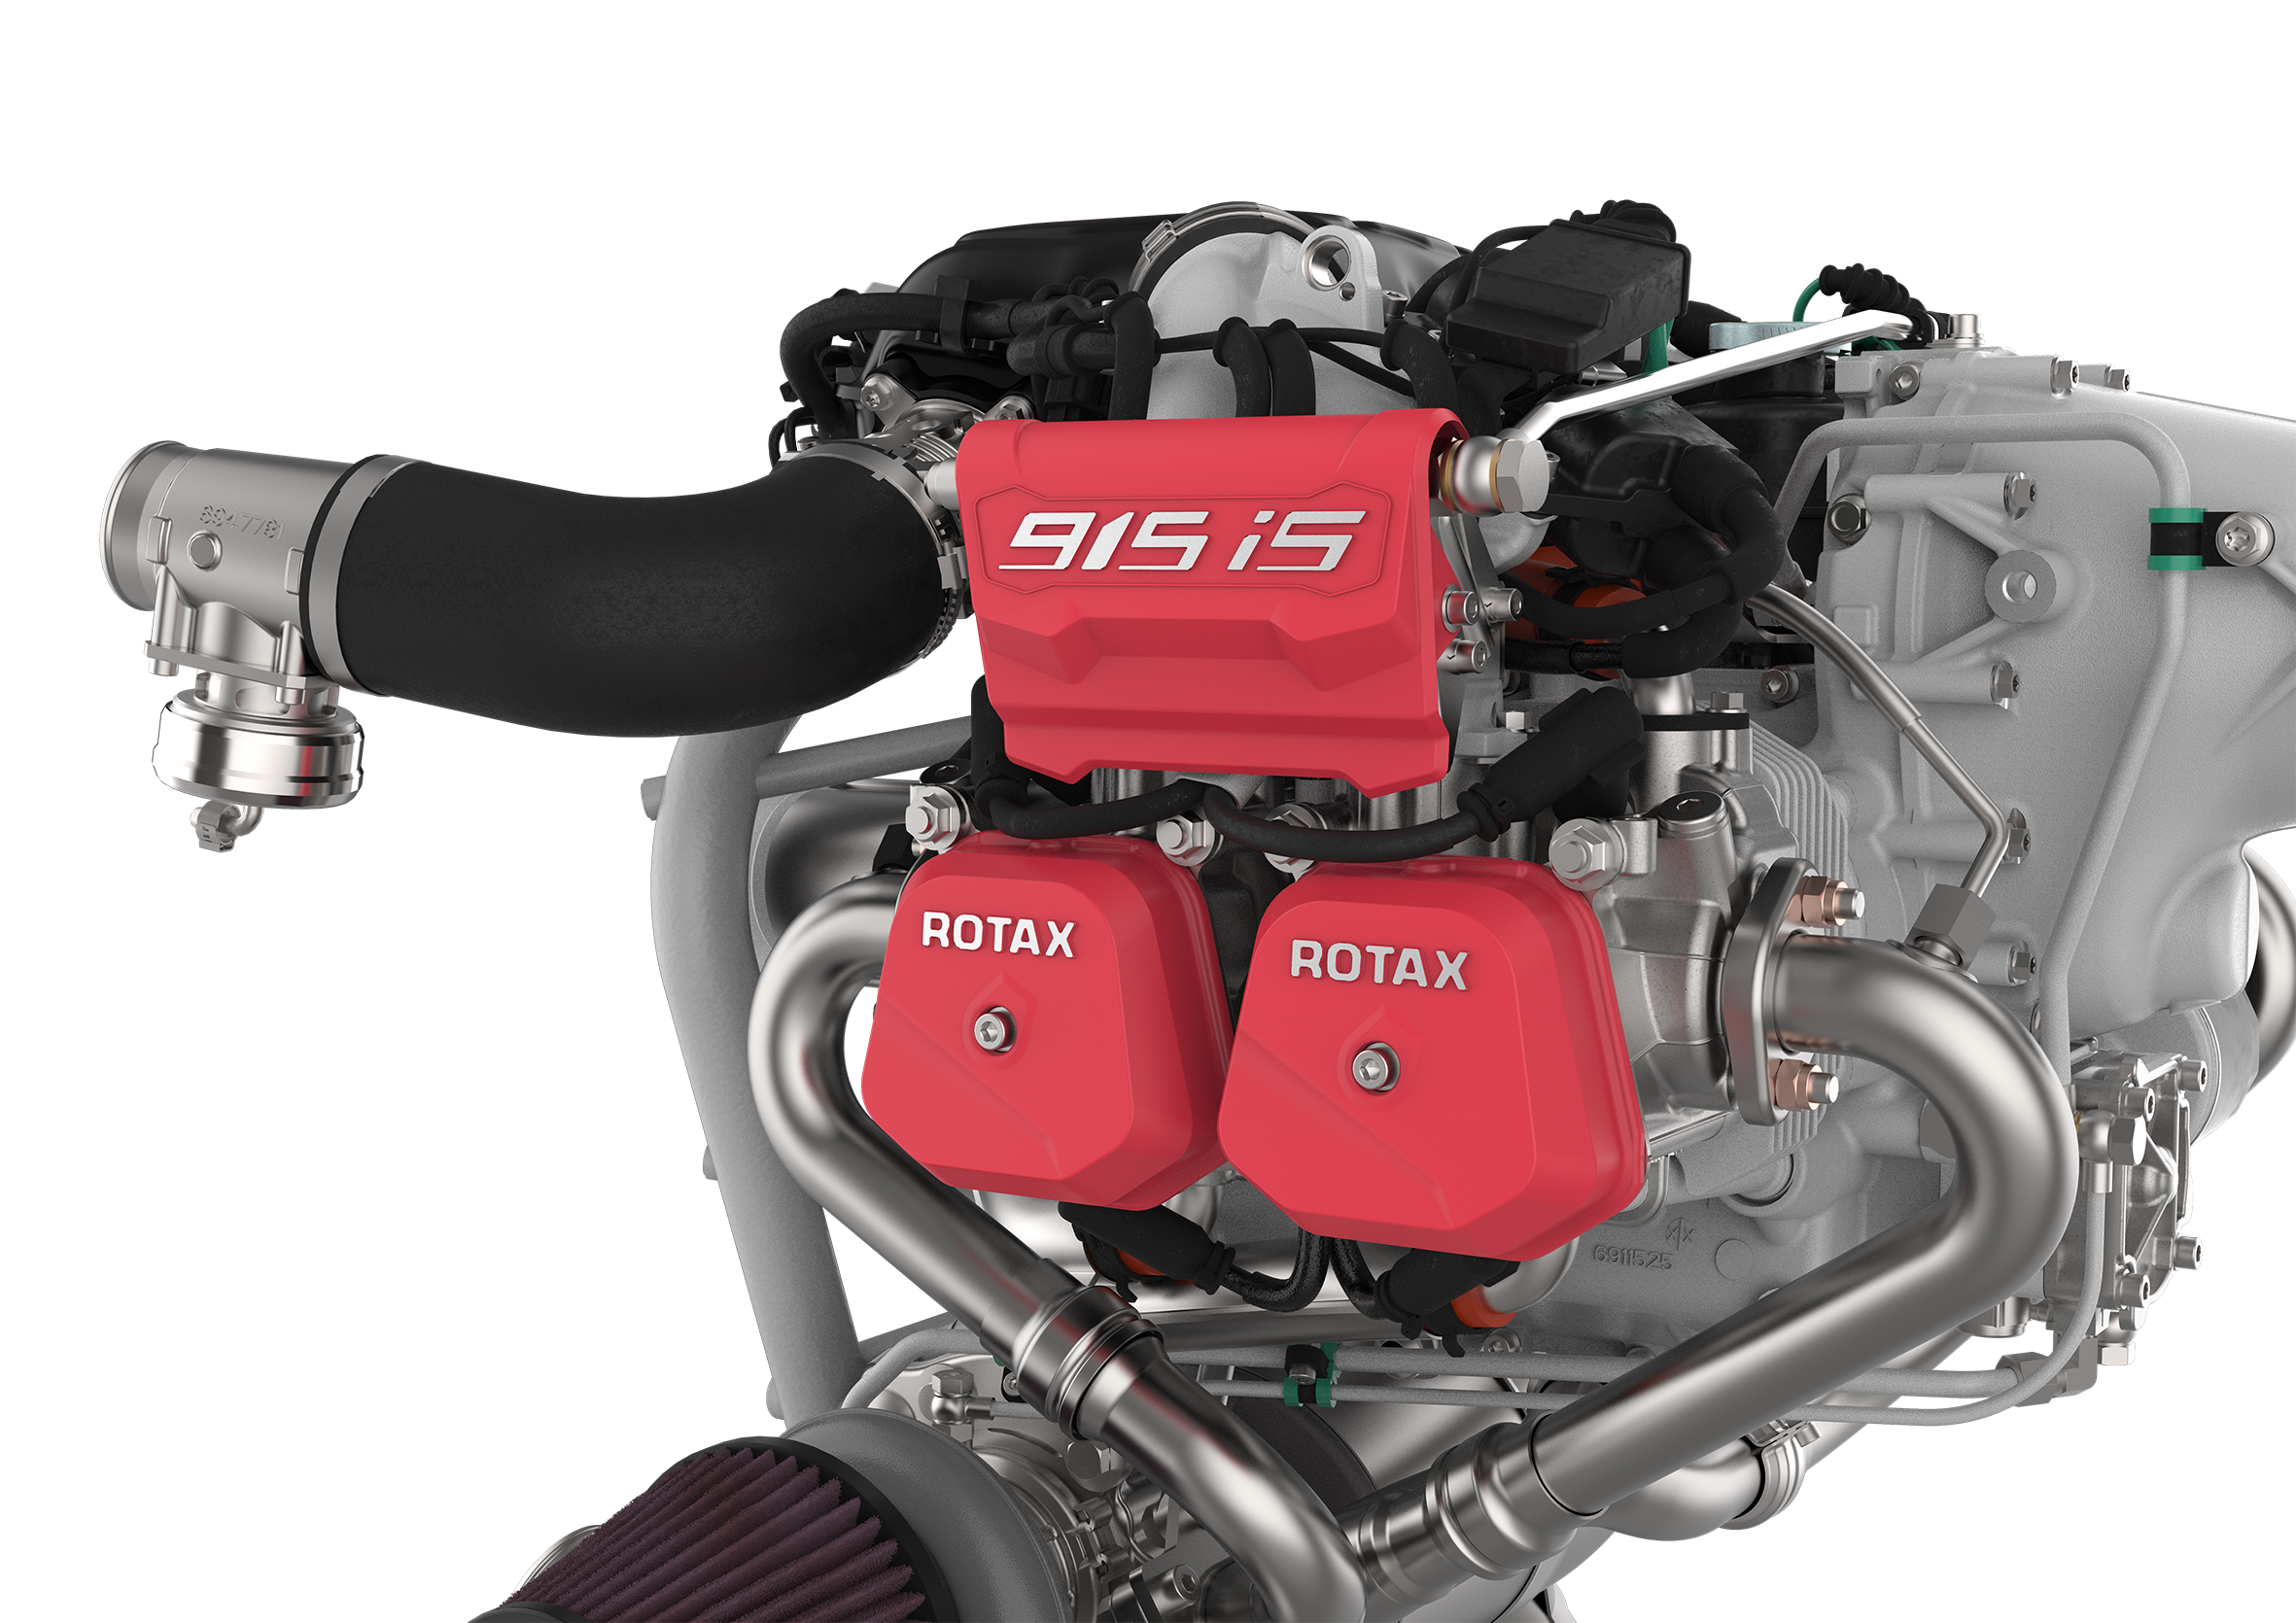 Rotax aircraft engine 915i S limited edition 1